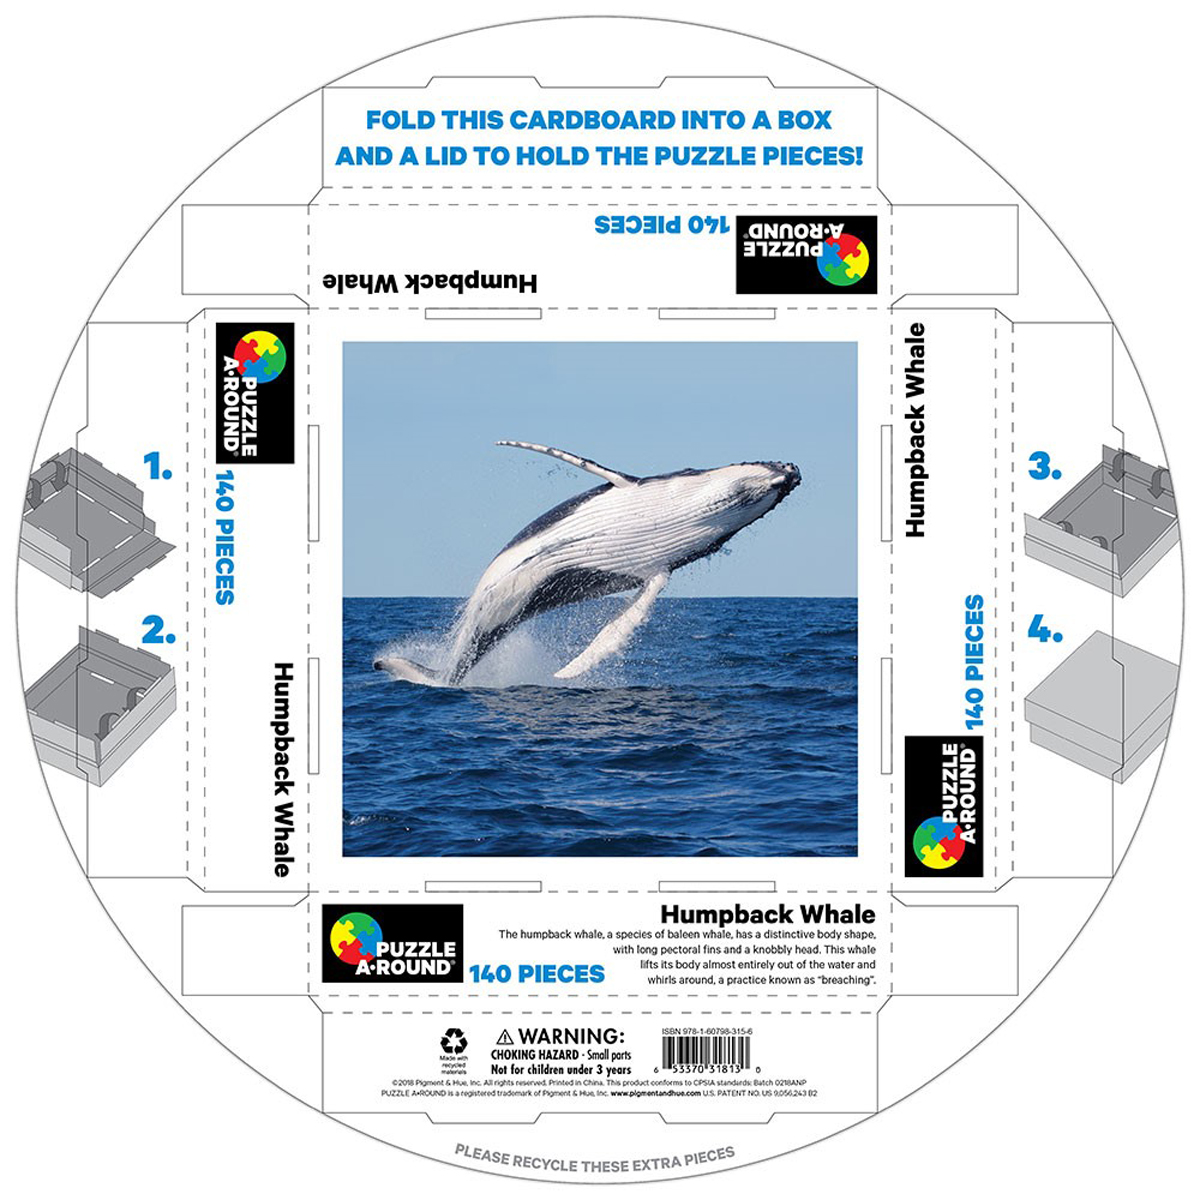 Humpback Whale Puzzle A-Round